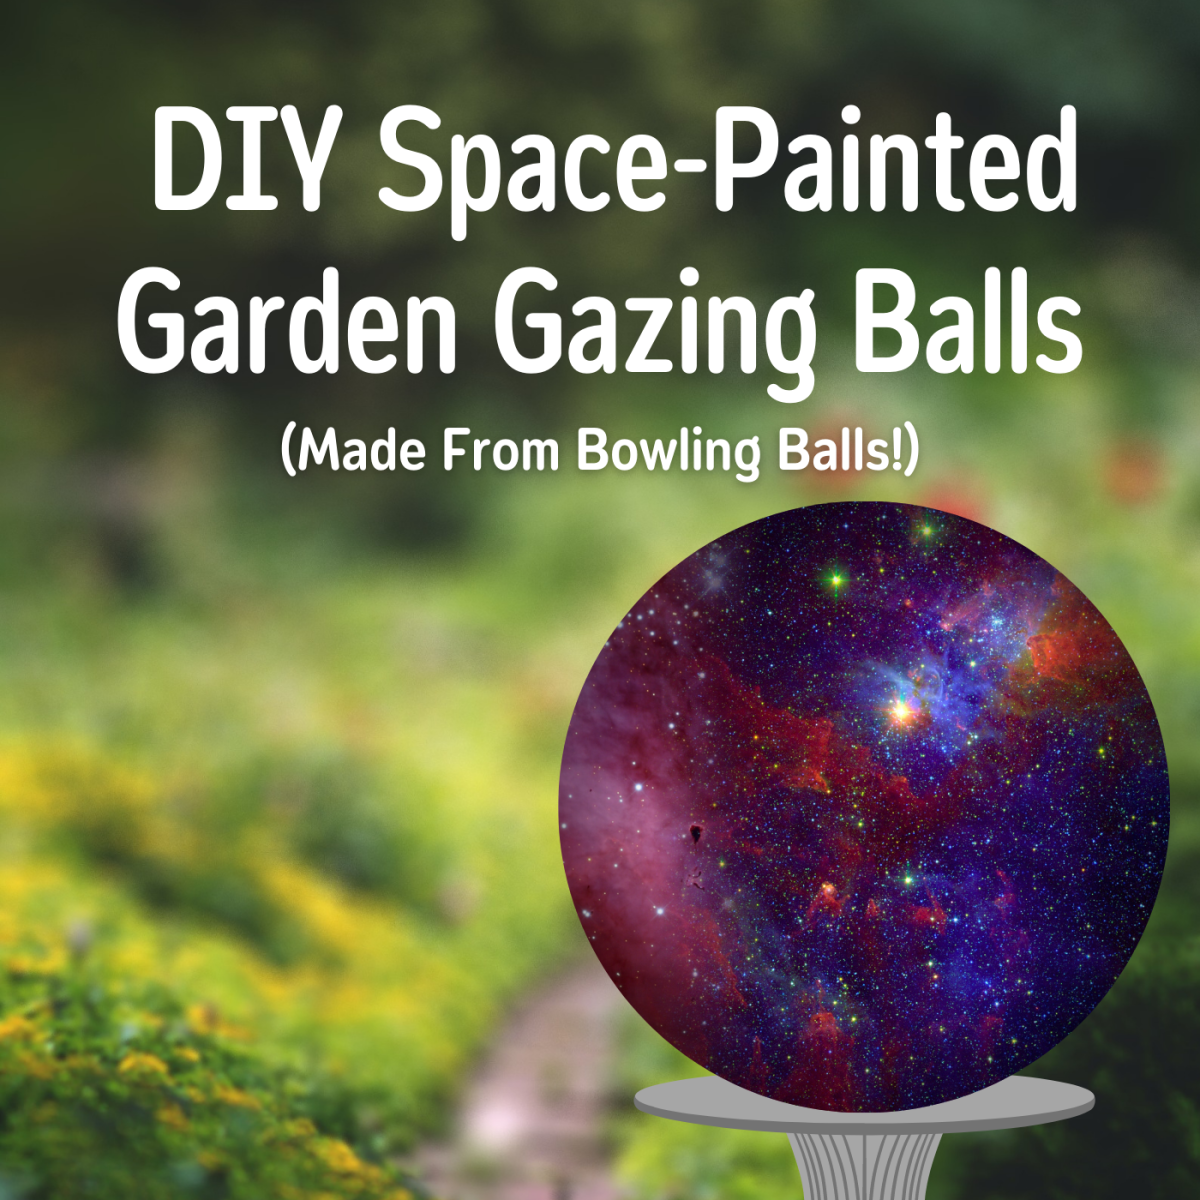 Learn how to use space-painting techniques to create gorgeous garden art from used bowling balls!